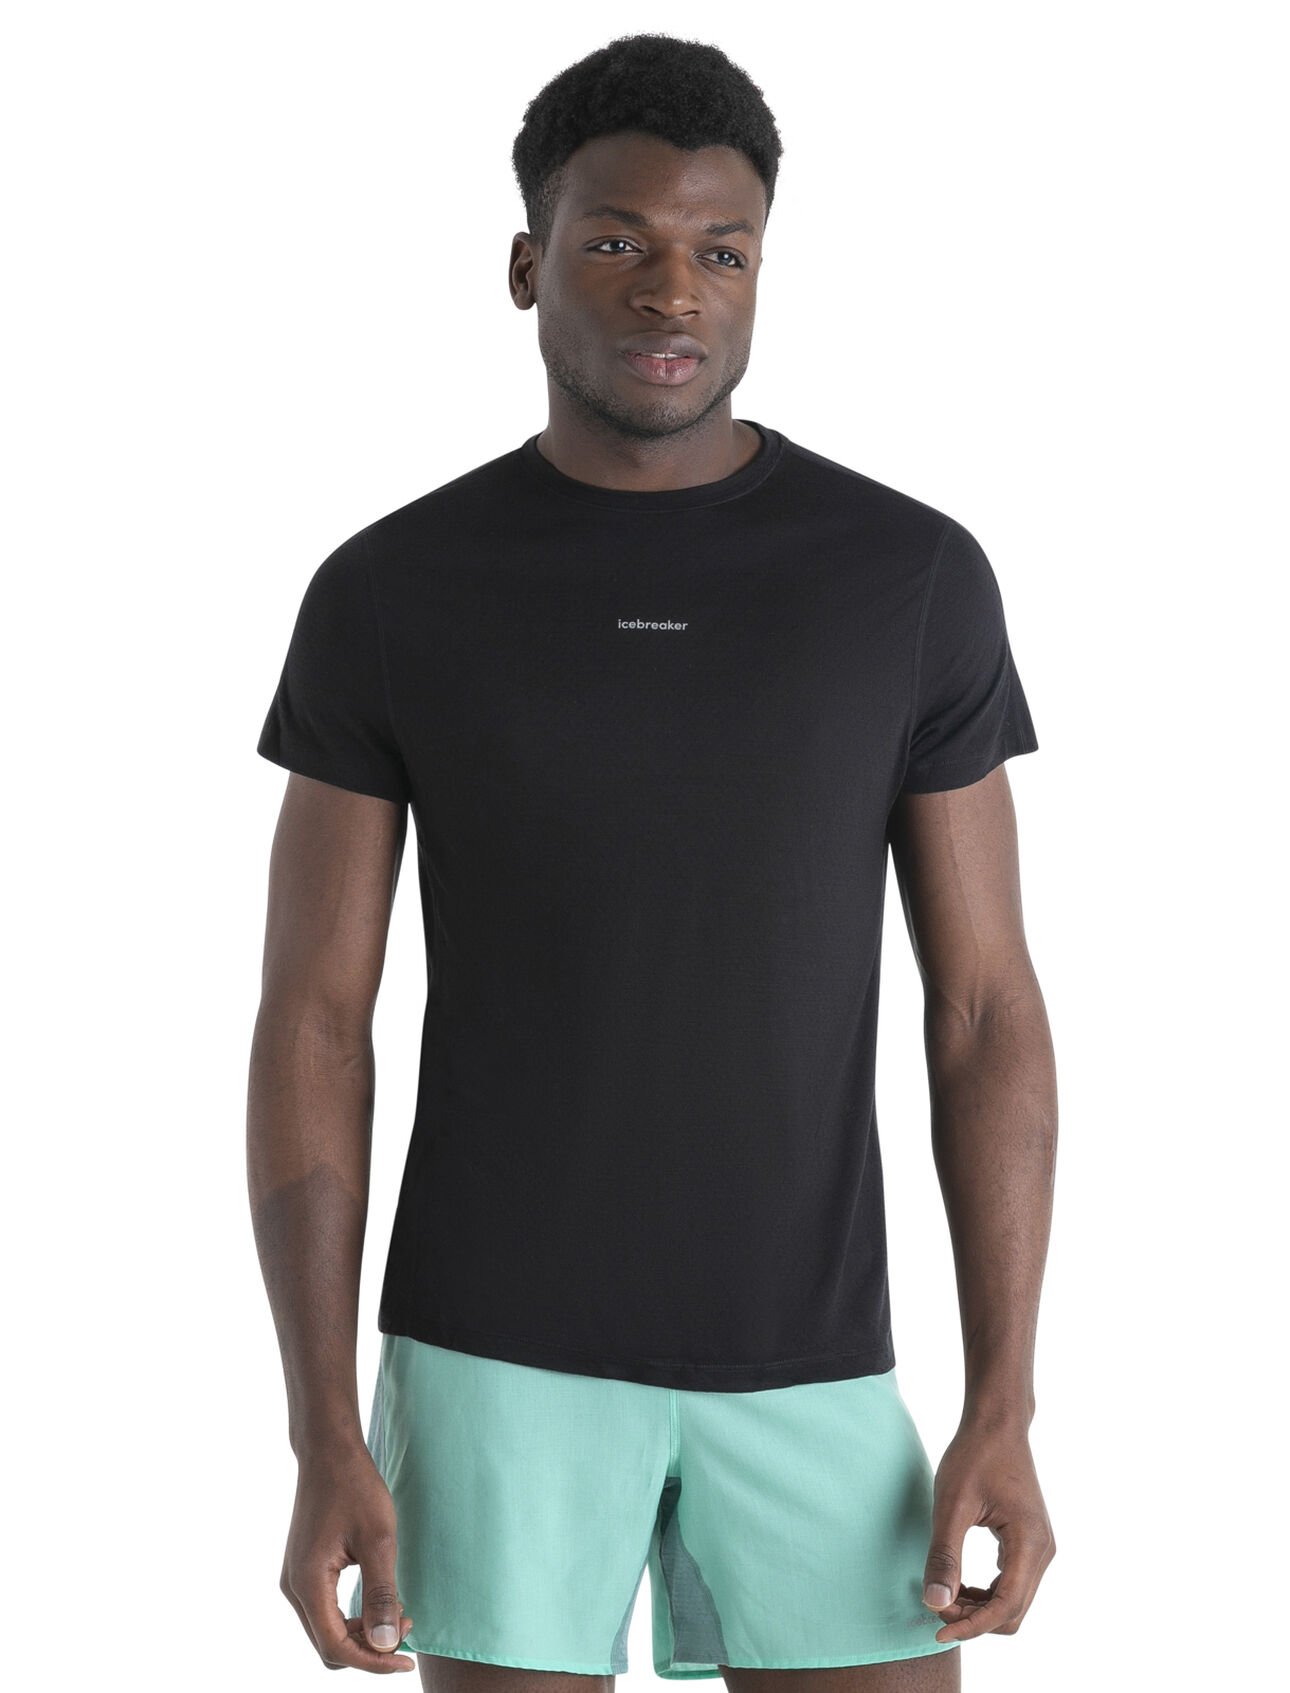 Mens 125 Cool-Lite™ Merino Blend Speed T-Shirt Our lightest, most breathable performance tee featuring Cool-Lite™eyelet mesh throughout, the Merino 125 Cool-Lite™ Speed Short Sleeve Tee is ideal for running and any other high-intensity pursuits in warm conditions.